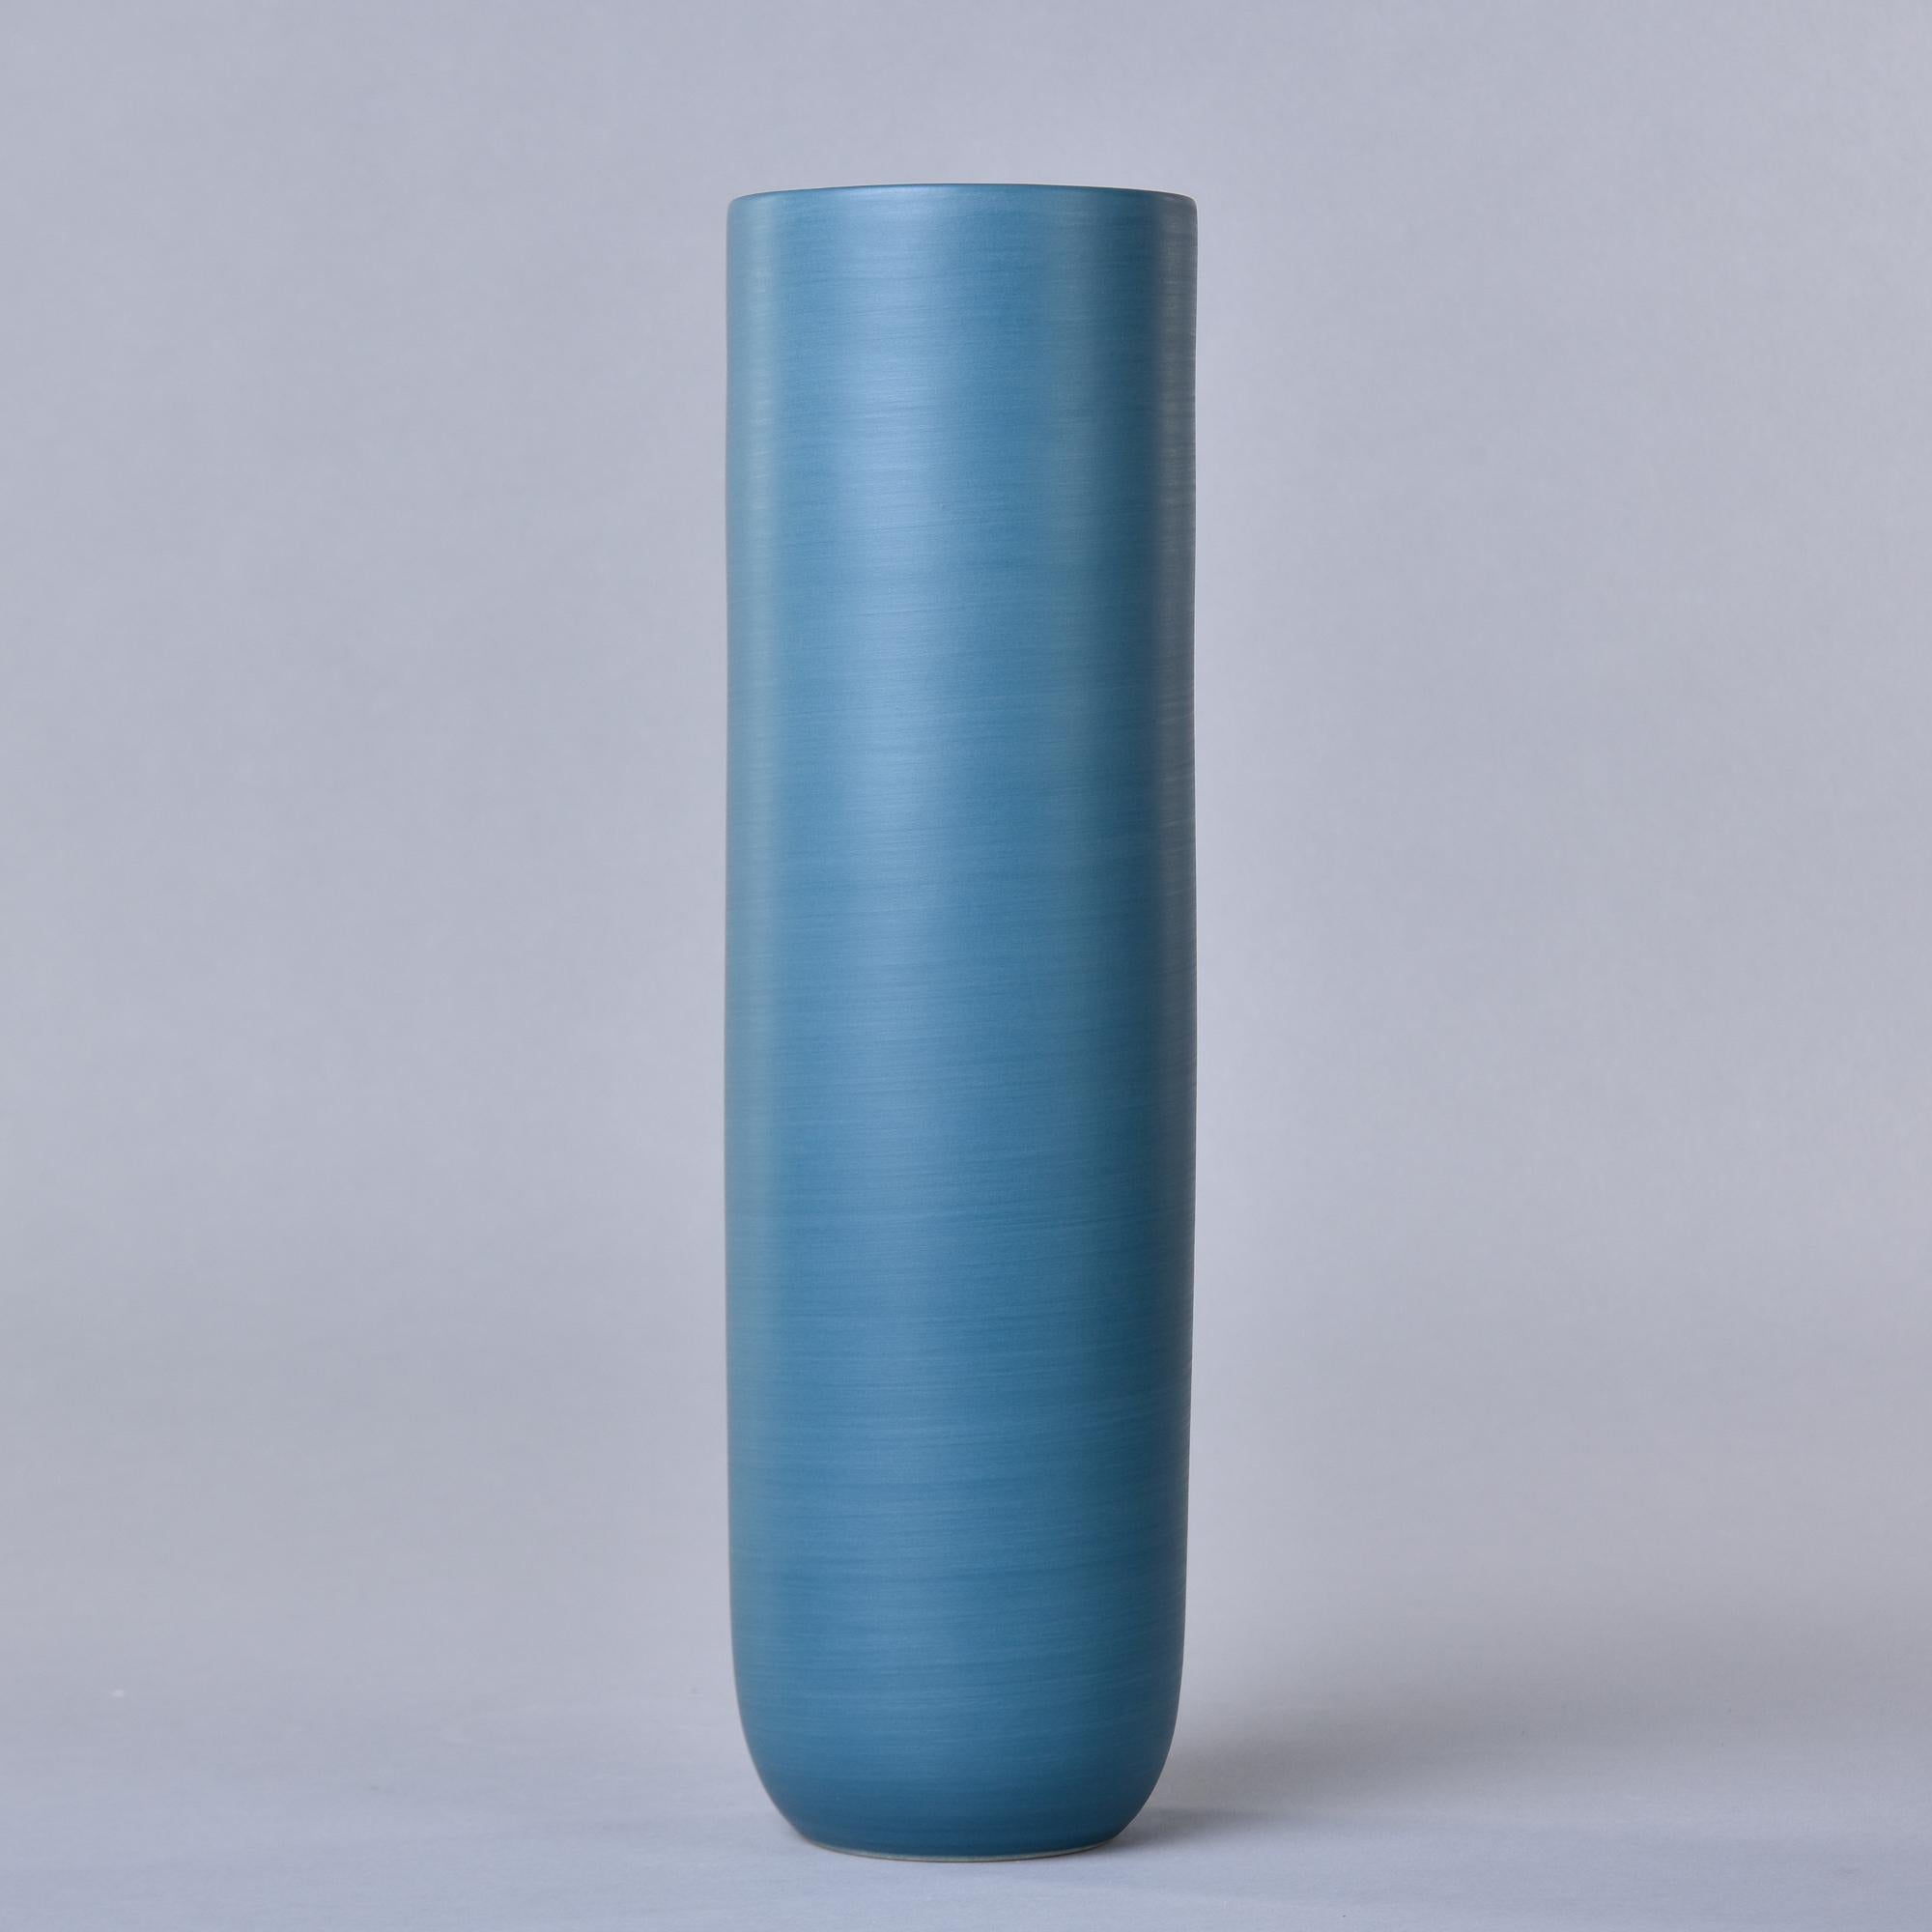 New and made in Italy by Rina Menardi, this ceramic vase is 14” tall. Exterior is glazed in teal blue - a matte finish saturated teal blue with a matte black interior. Signed by maker on underside of base. At the time of this posting, we have